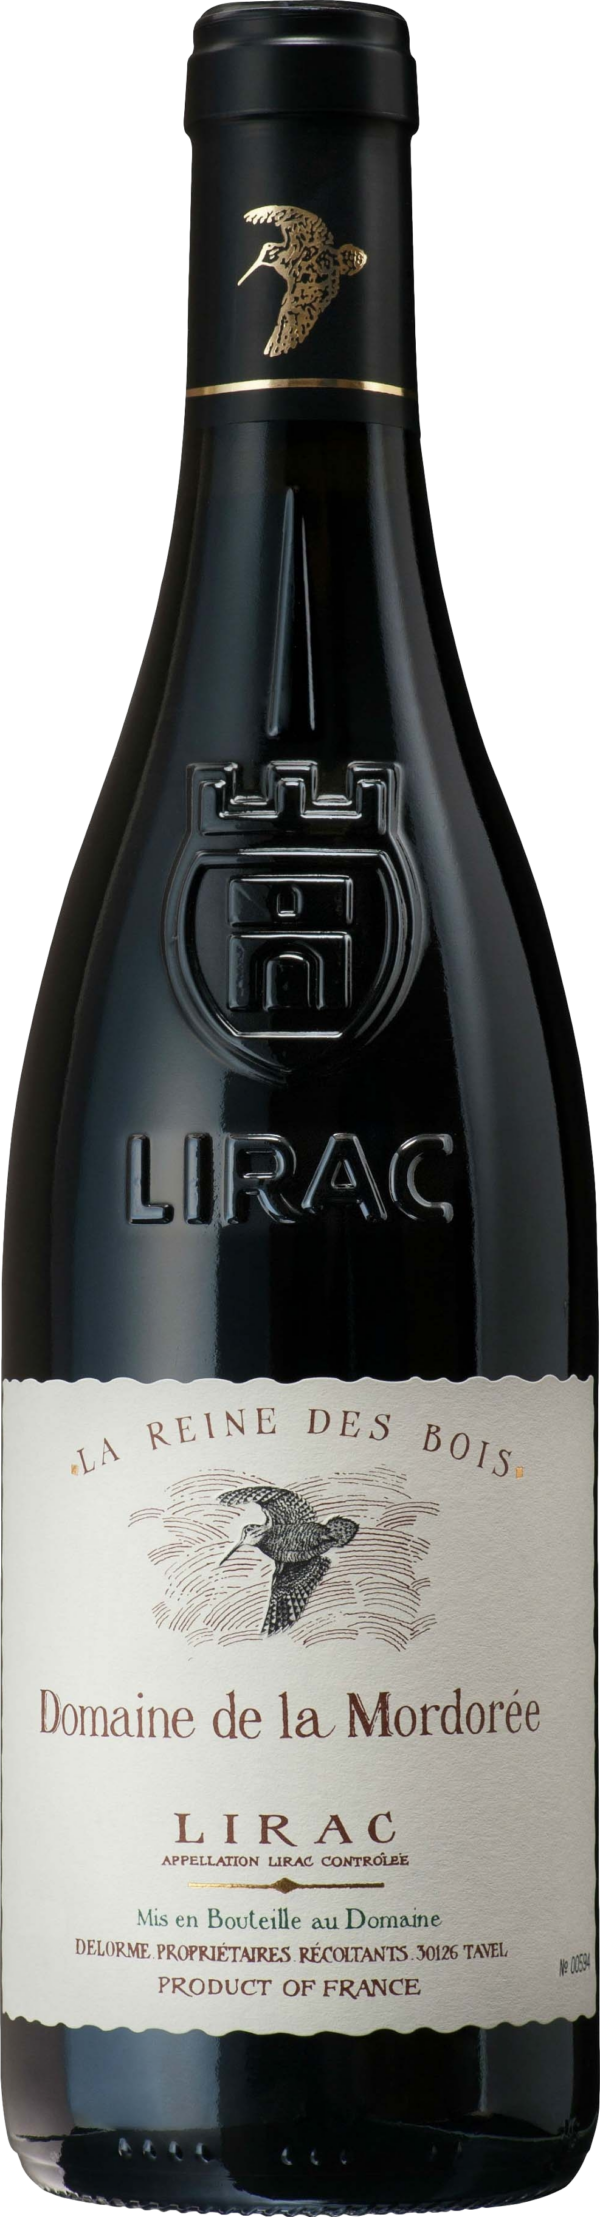 Product image of Mordoree Lirac Rouge La Reine des Bois 2020 from 8wines